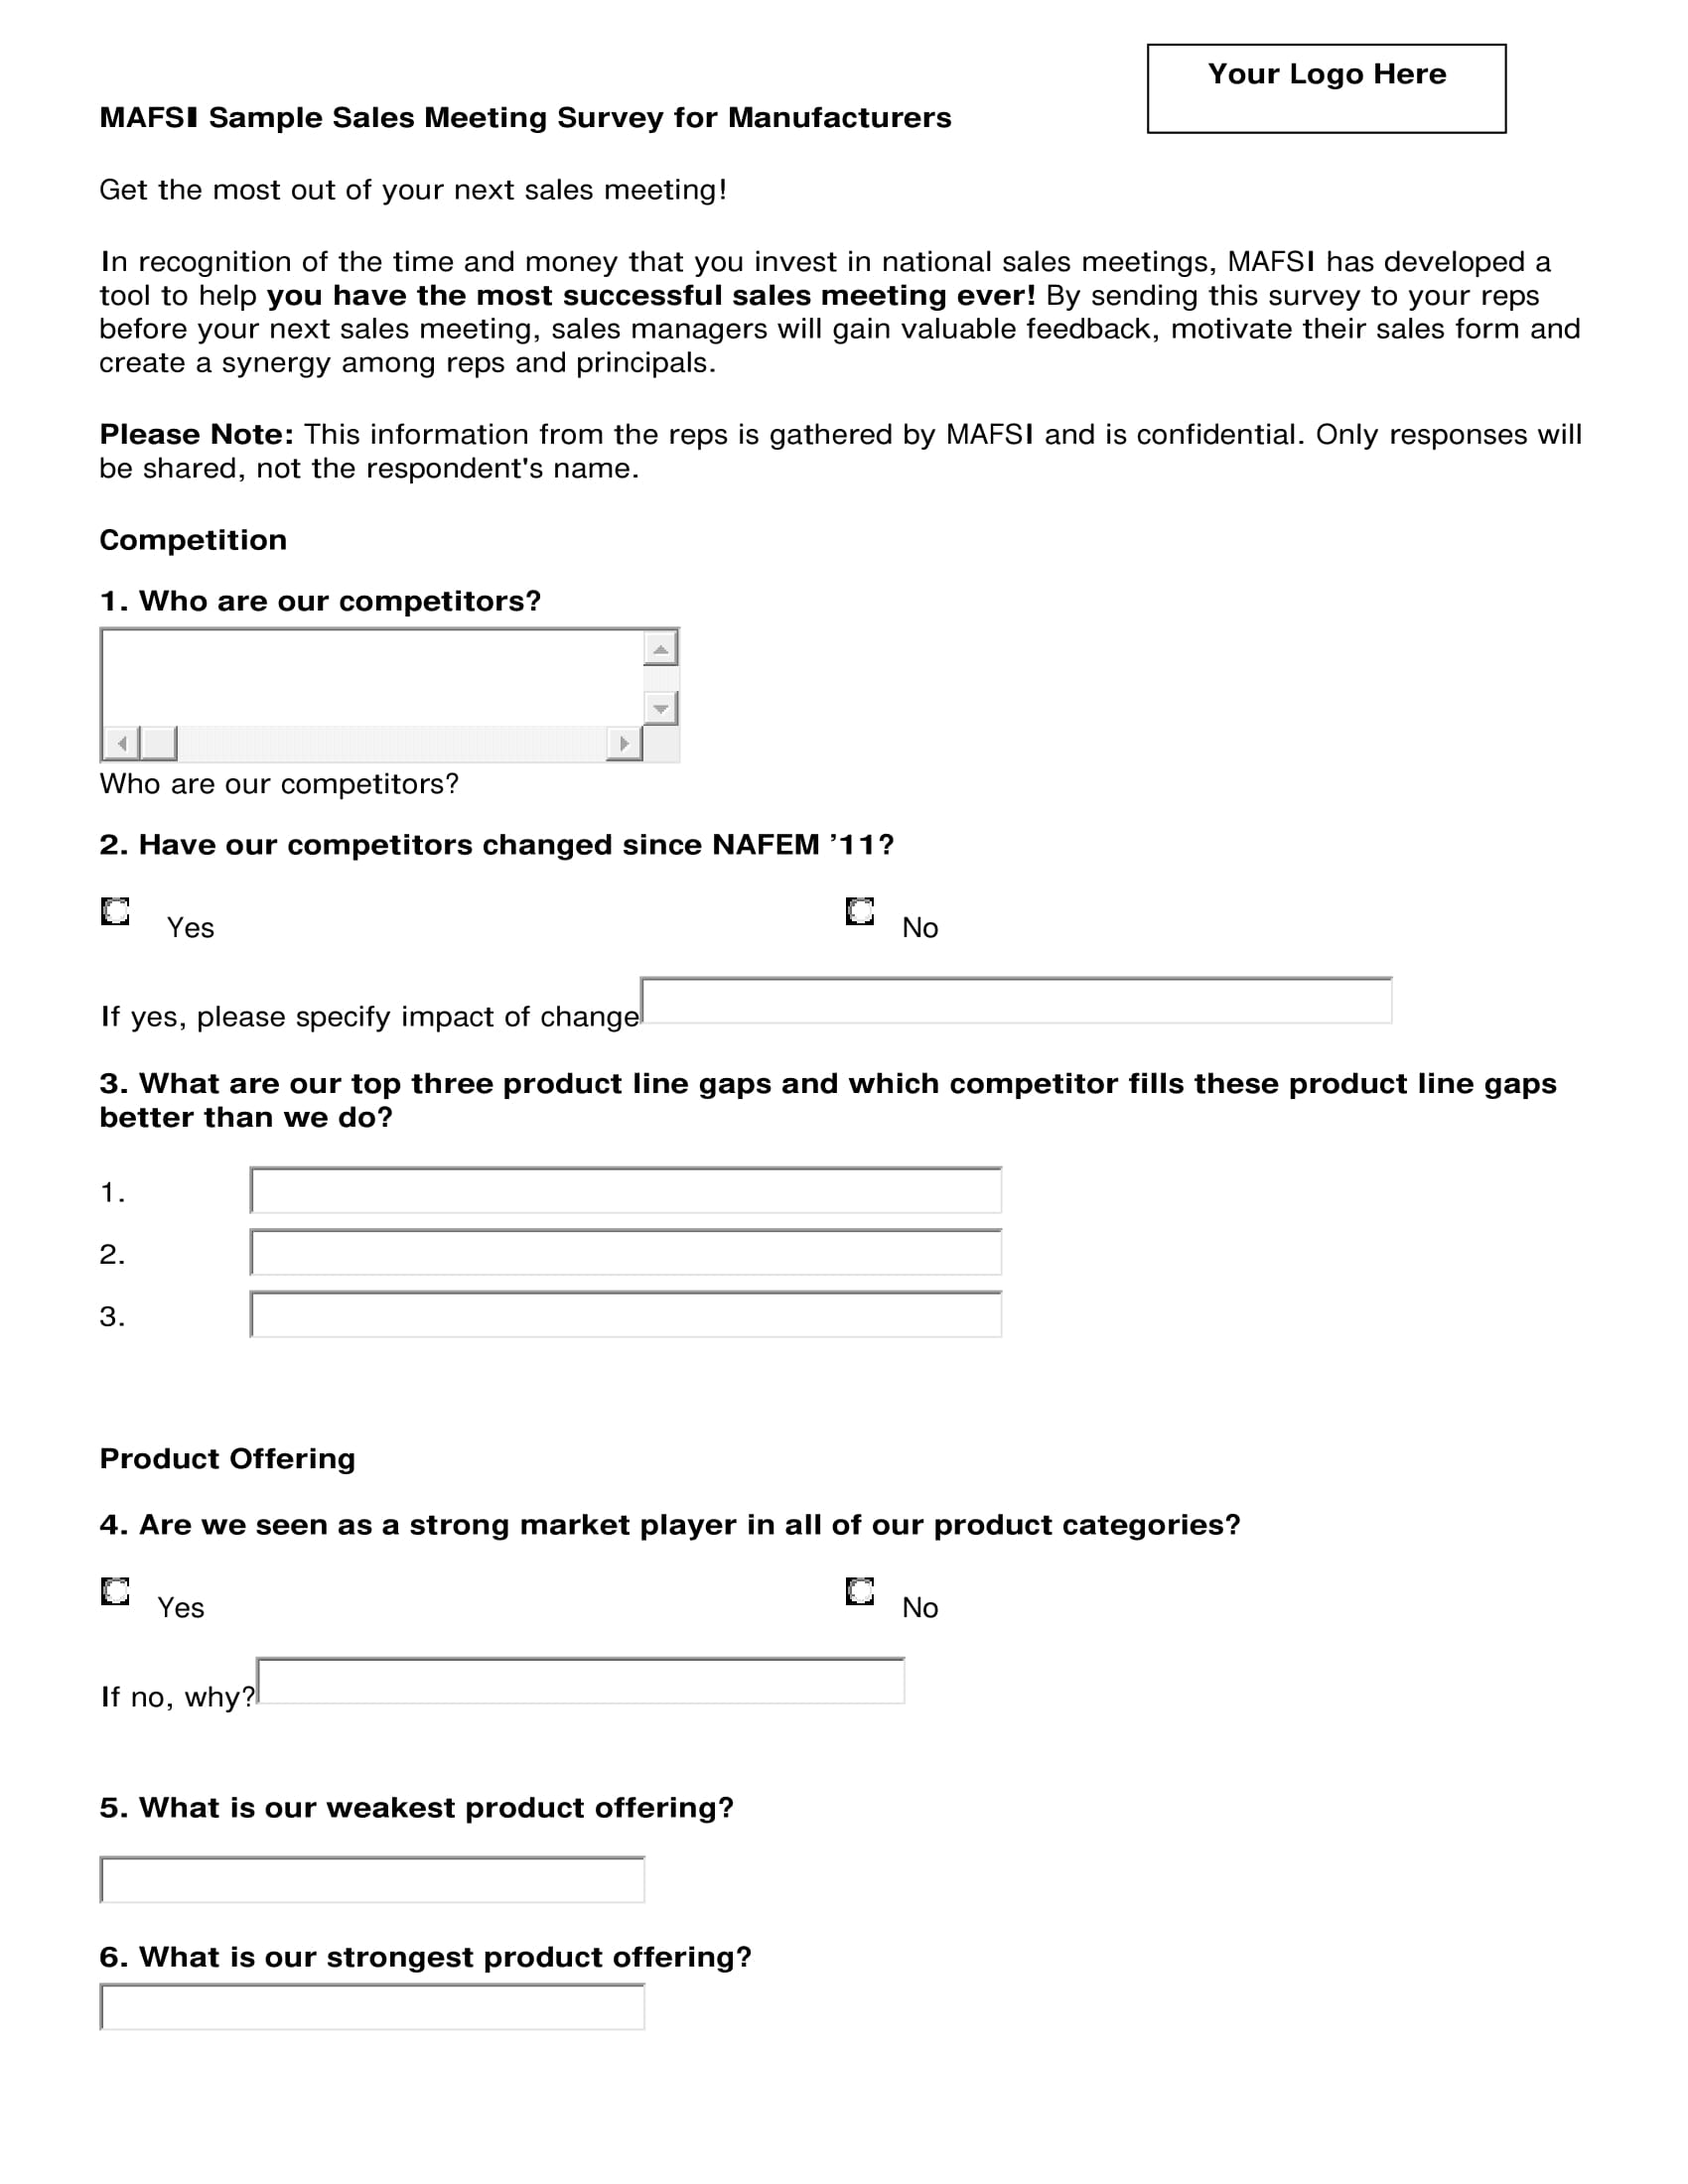 Sales Survey for Manufacturers Example